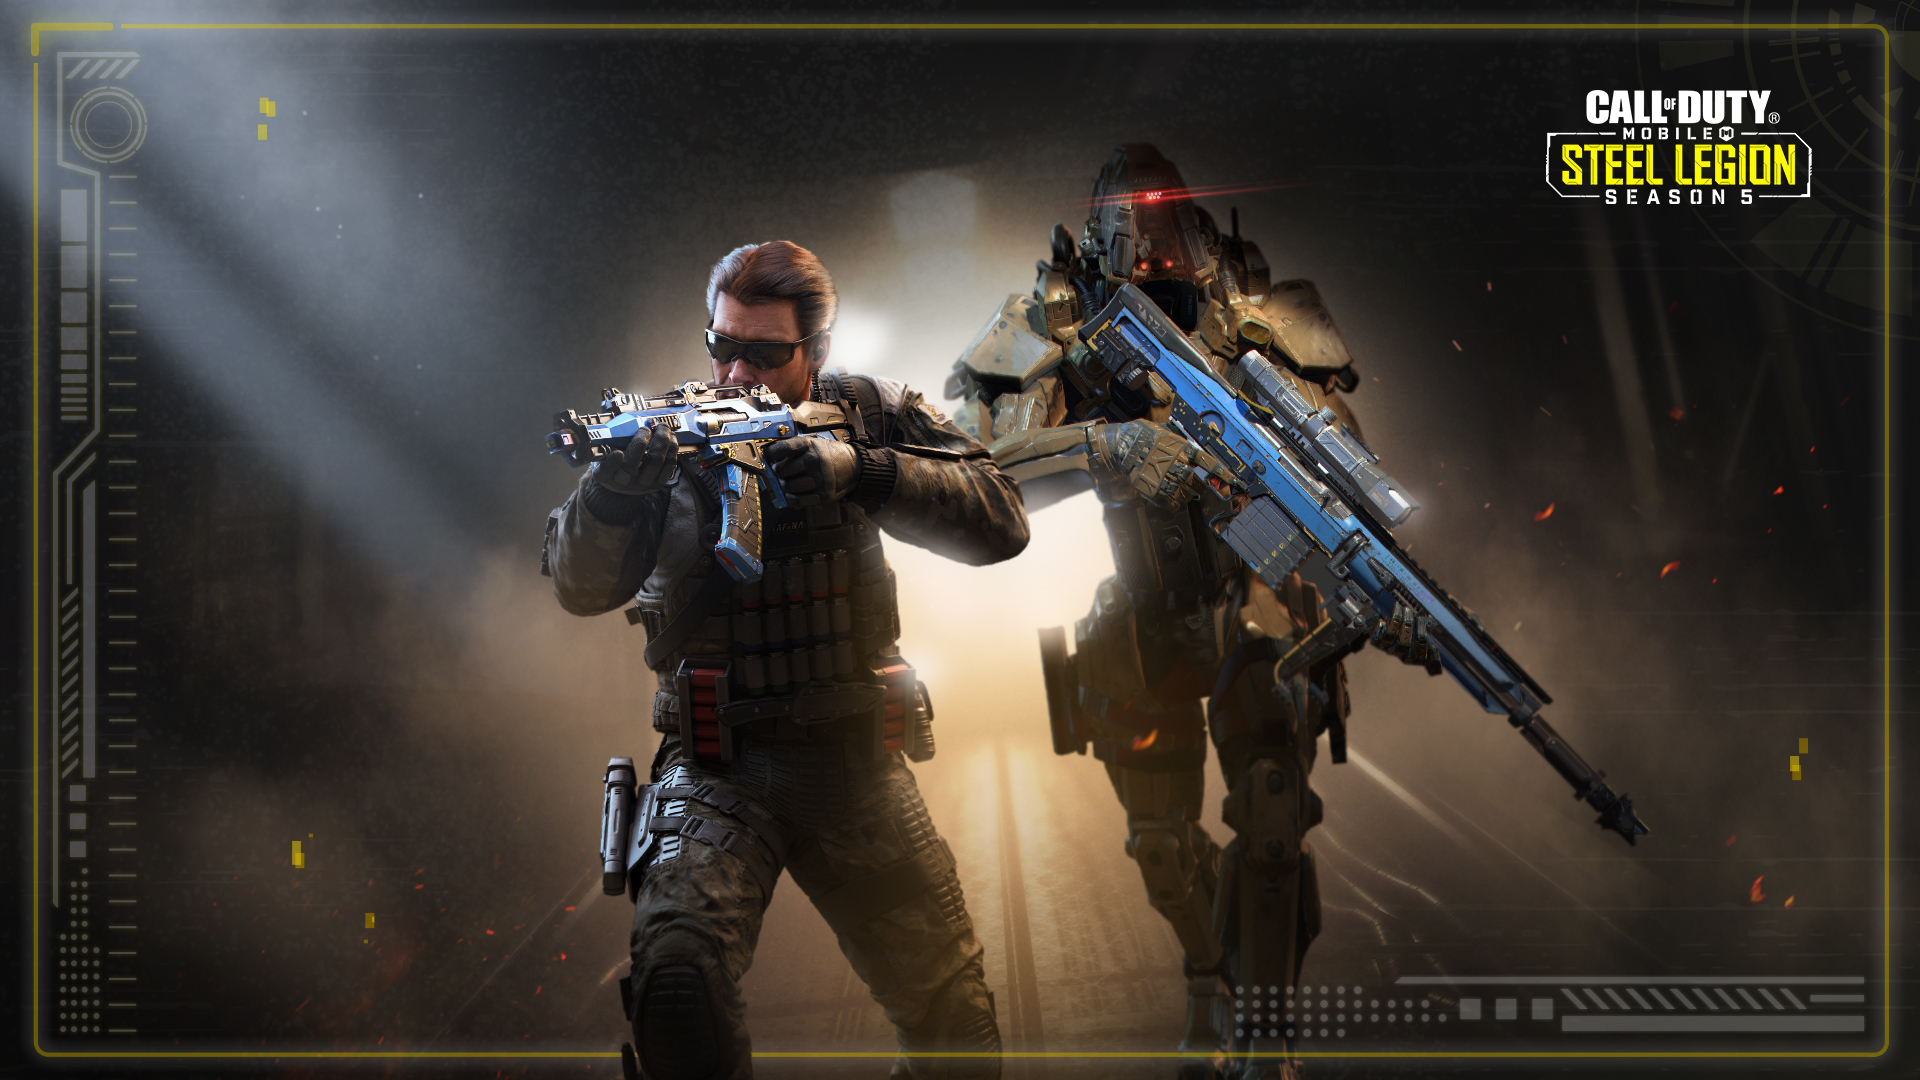 1080x224020 Call Of Duty Mobile Season 5 Steel Legion 1080x224020  Resolution Wallpaper, HD Games 4K Wallpapers, Images, Photos and Background  - Wallpapers Den